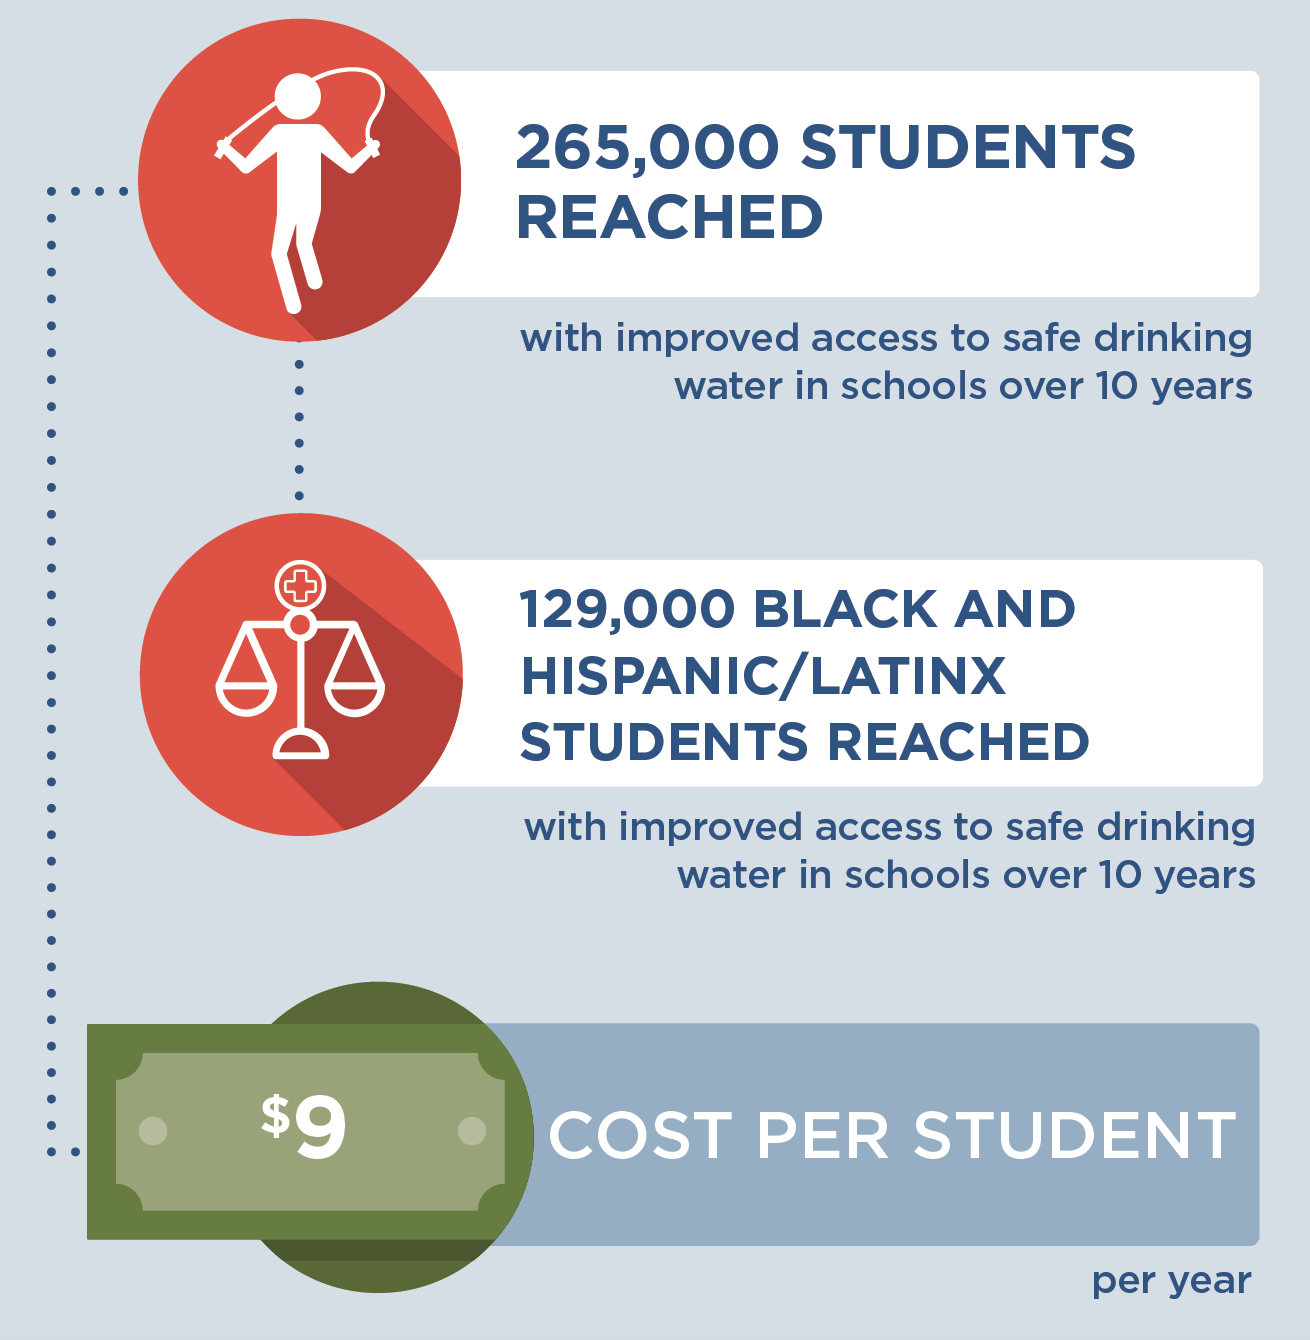 If touchless water dispensers were installed in schools in Massachusetts, then by the end of 2029, 265,000 students would be reached with improved access to safe drinking water in schools over 10 years and 129,000 of these students would be Black and Latinx students. This intervention would only cost $9 per student per year to implement.